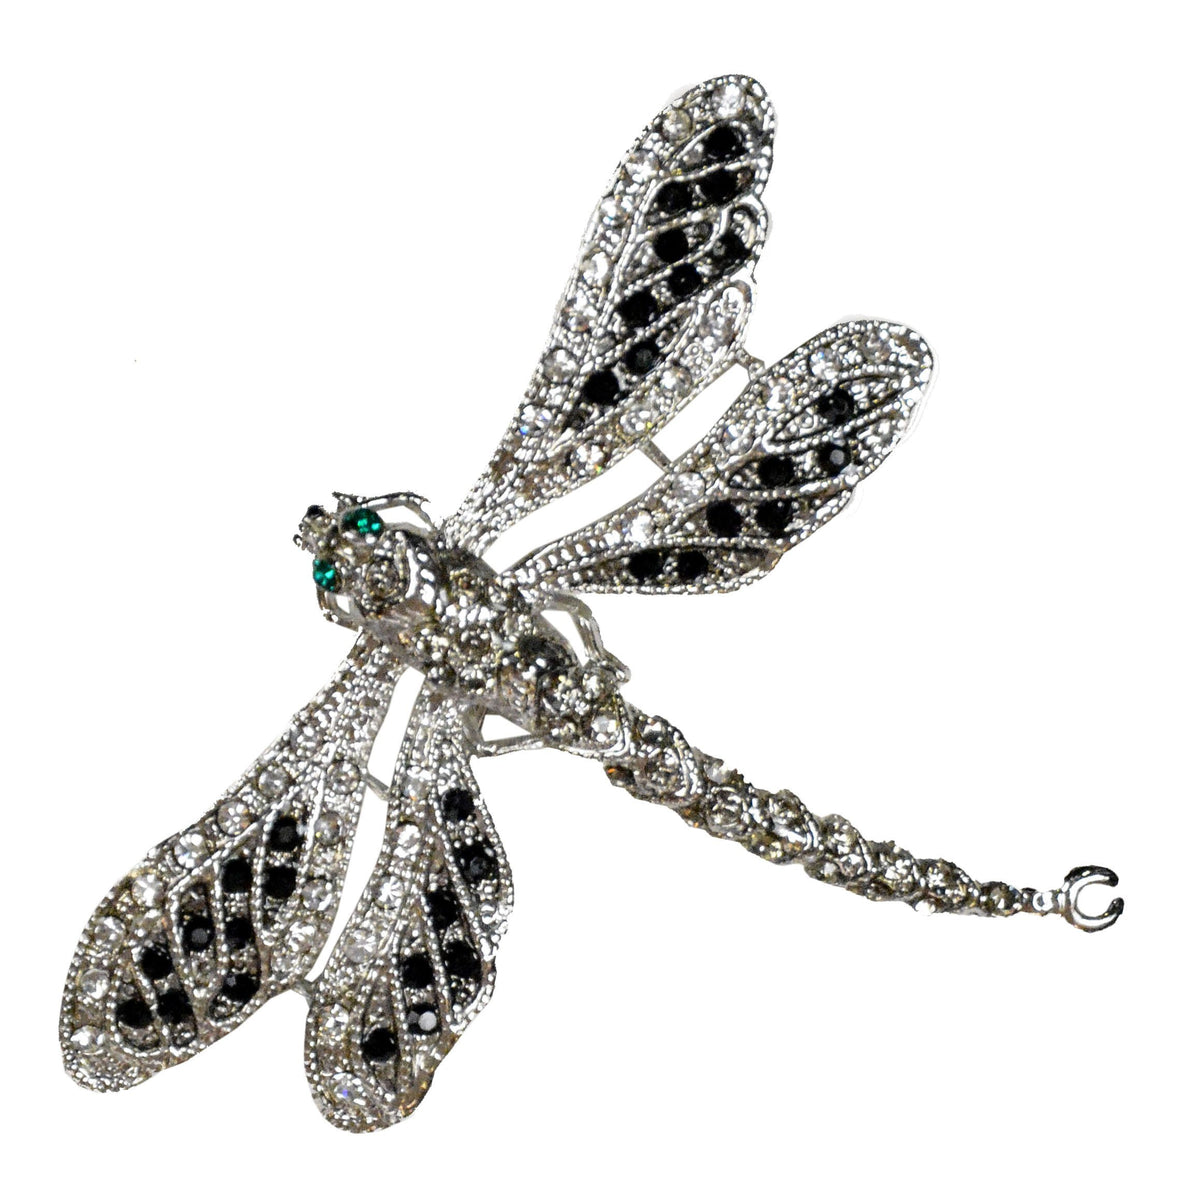 Rhinestone Brooch or Necklace Charm | Silver Dragonfly | from Pandemonium Millinery